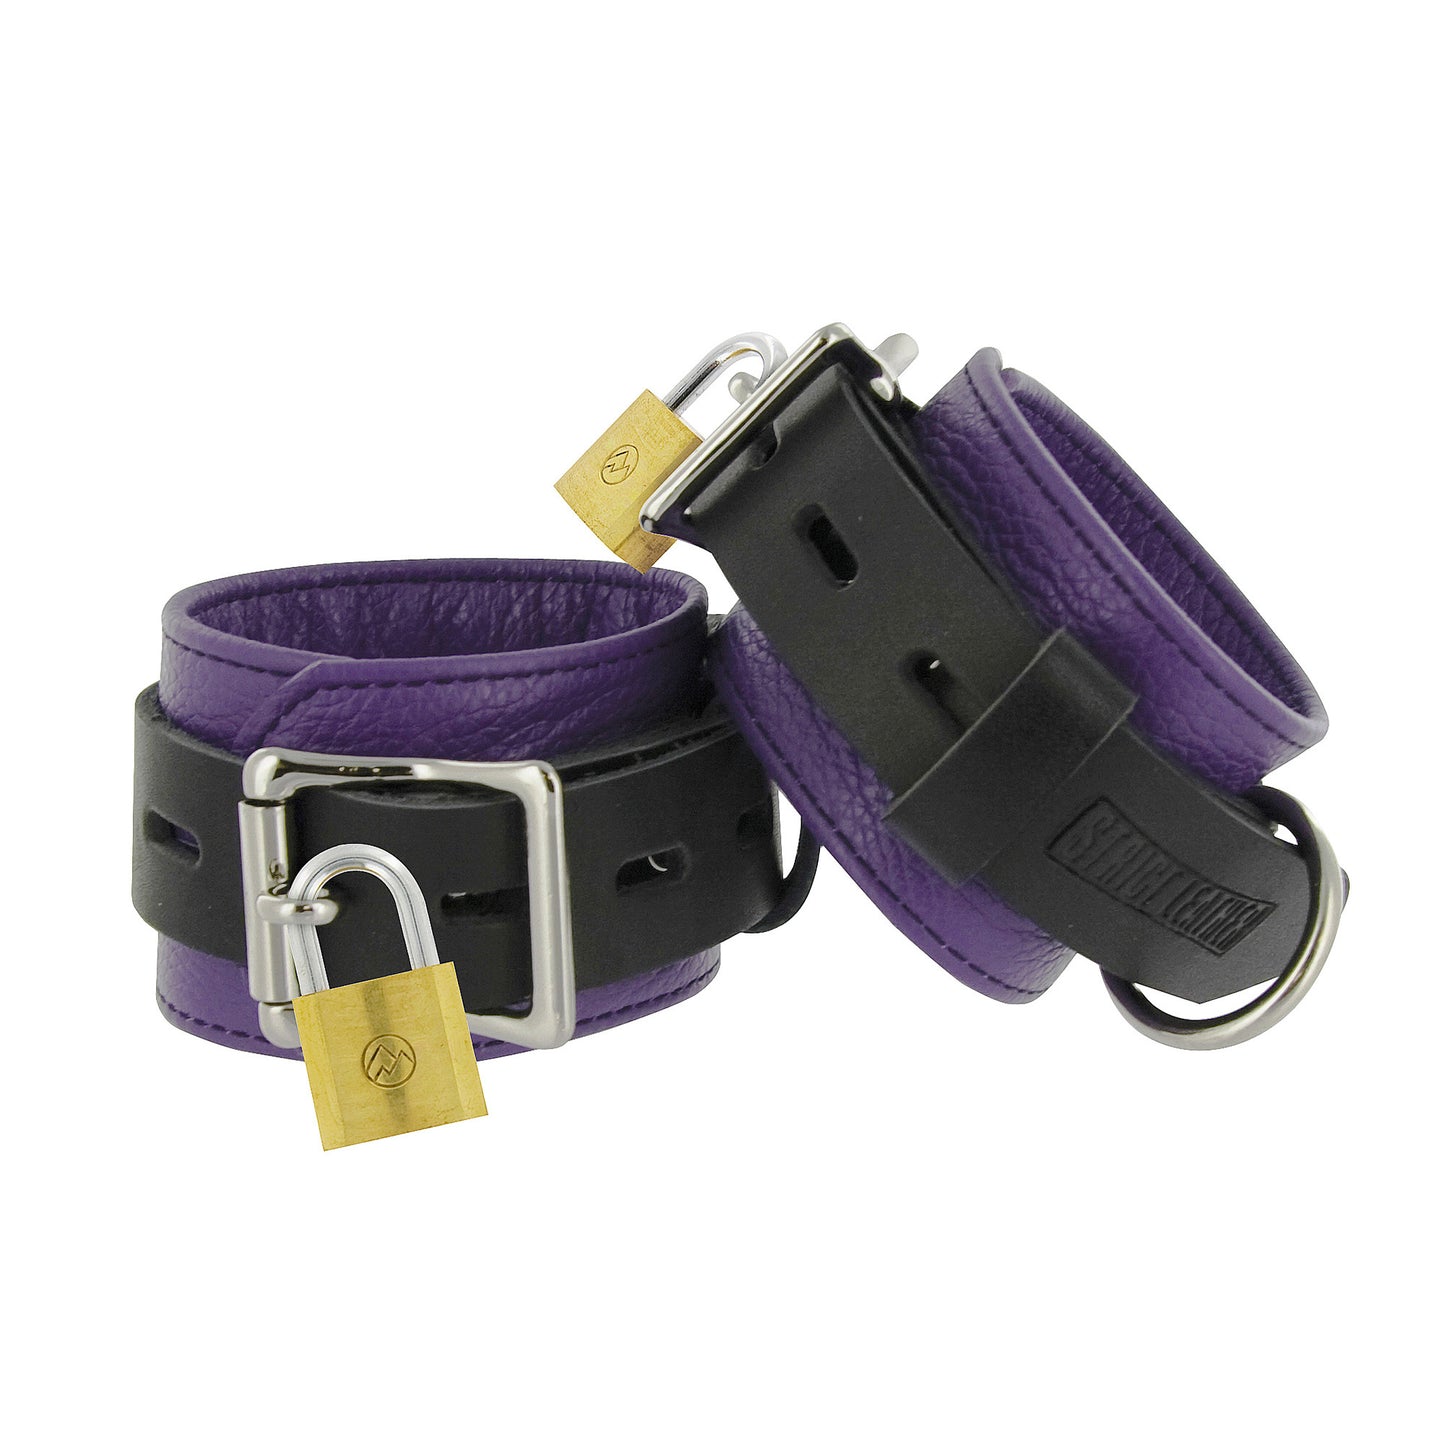 Strict Leather Purple And Black Deluxe Locking Wrist Cuffs